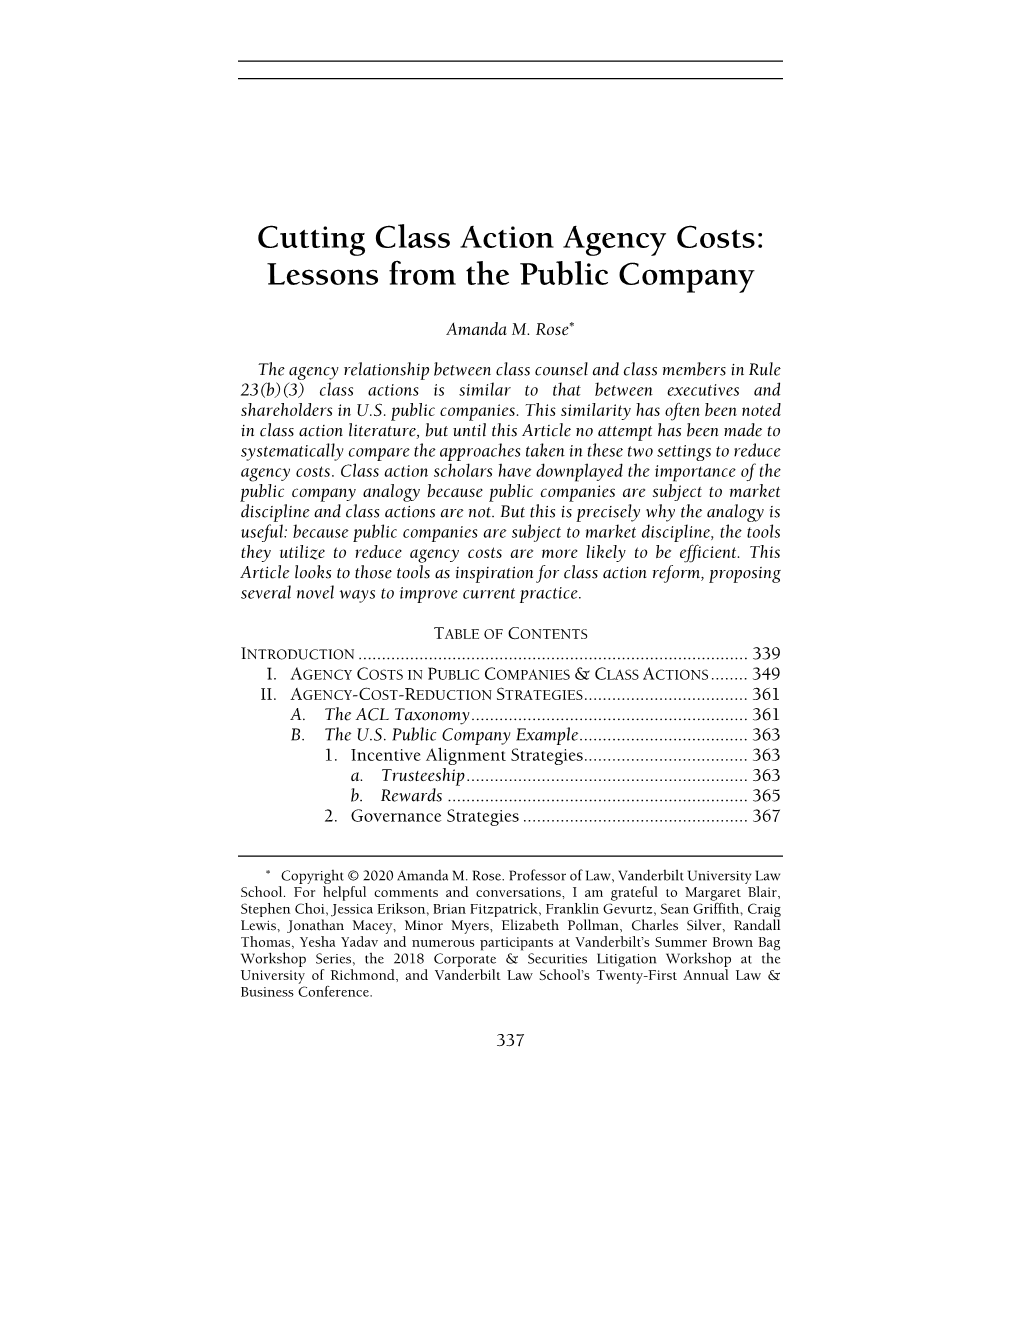 Cutting Class Action Agency Costs: Lessons from the Public Company